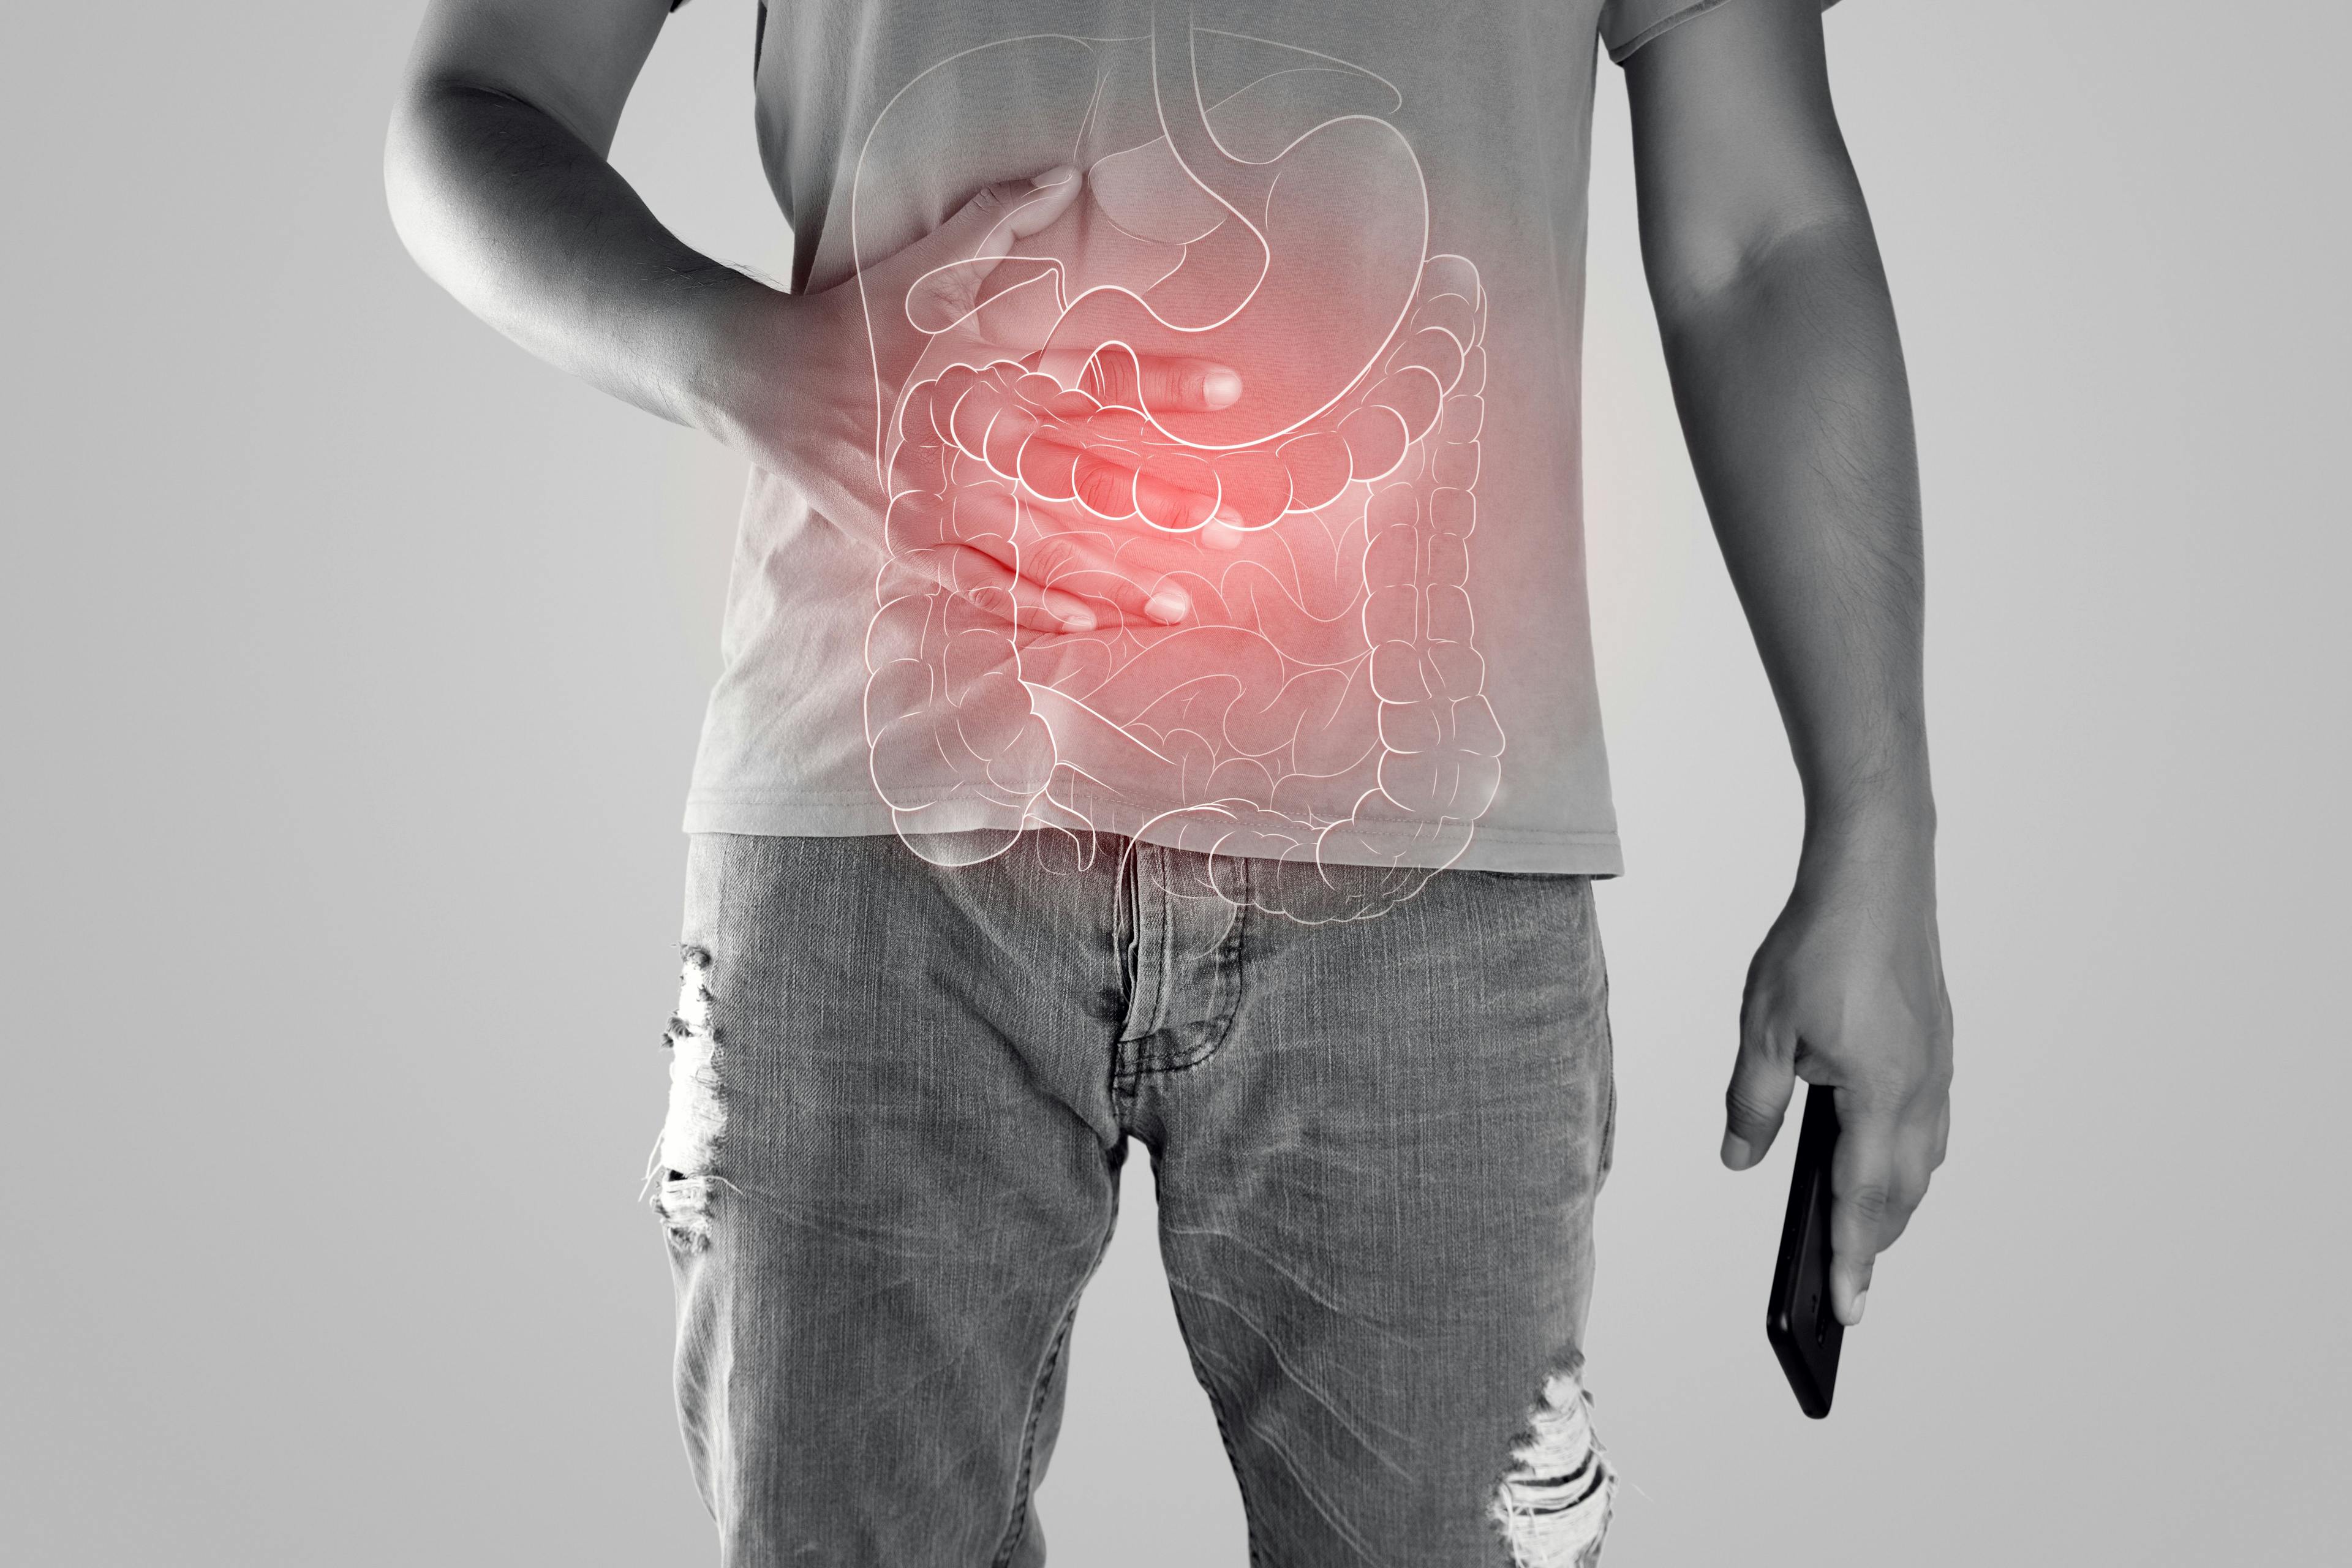 Illustration of internal organs is on the man body against the gray background. Peopel touching stomach painful suffering from enteritis. internal organs of the human body